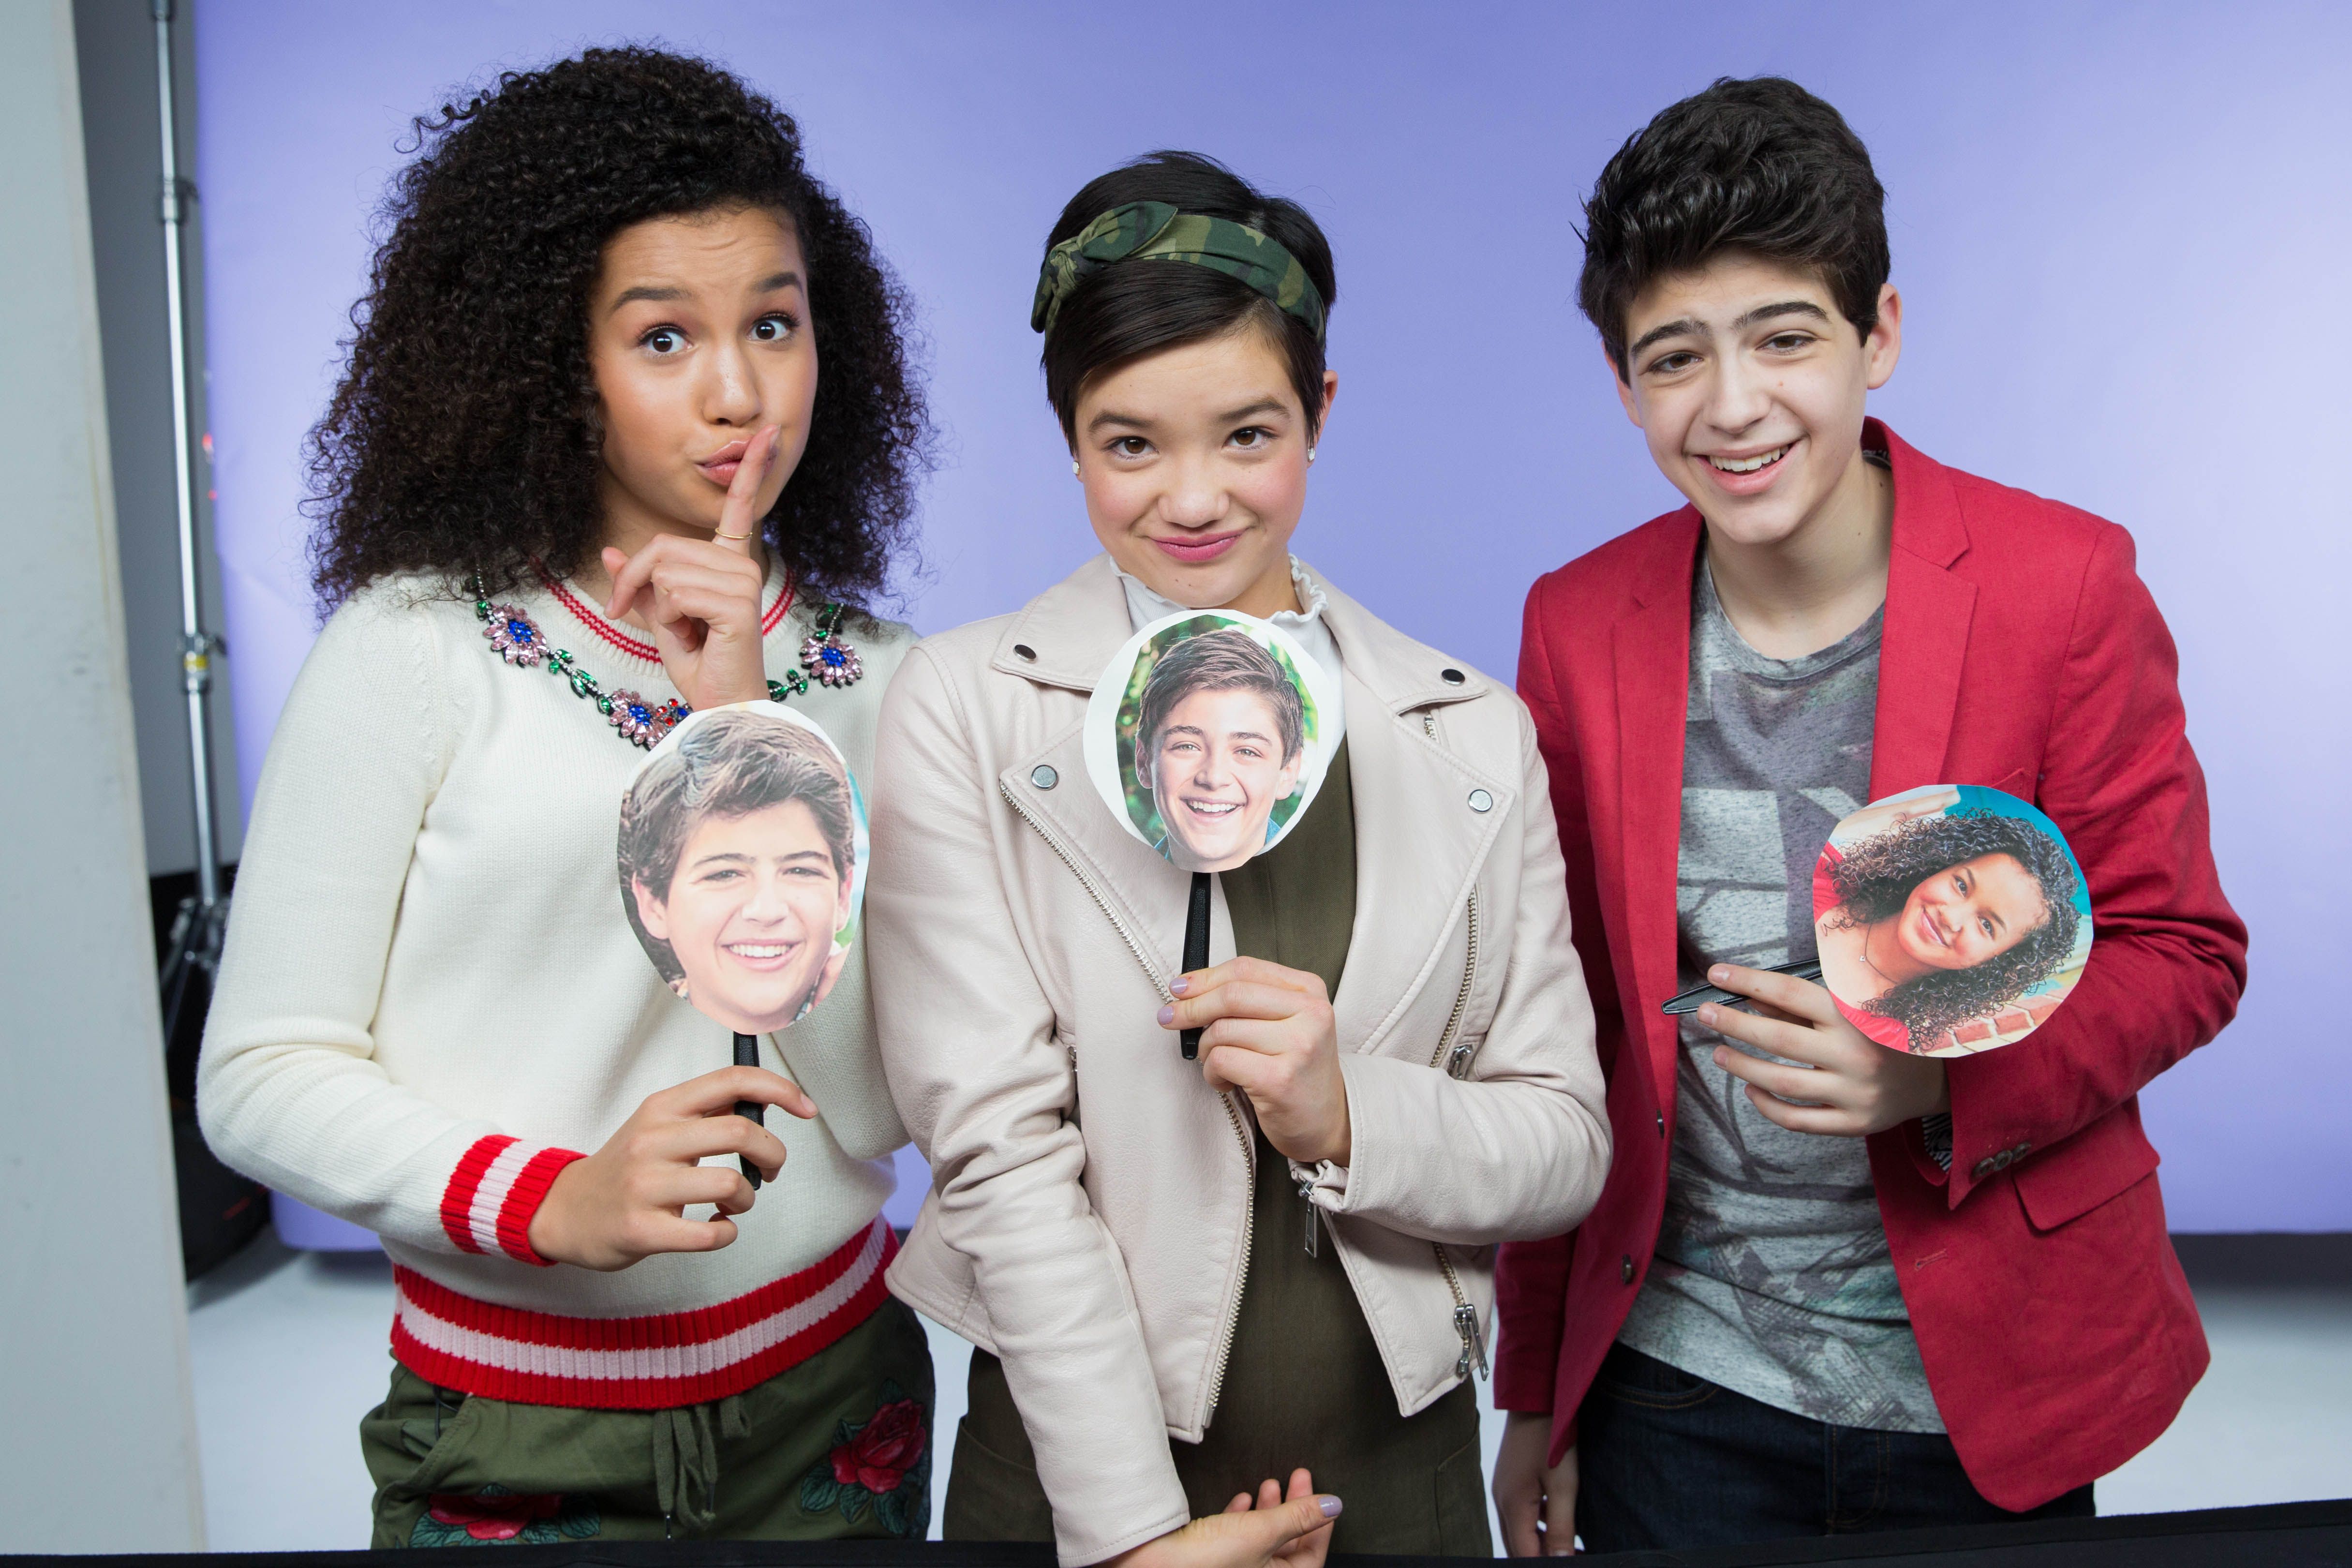 The Cast of 'Andi Mack' Reveals Behind-the-Scenes Set Secrets From Season 1